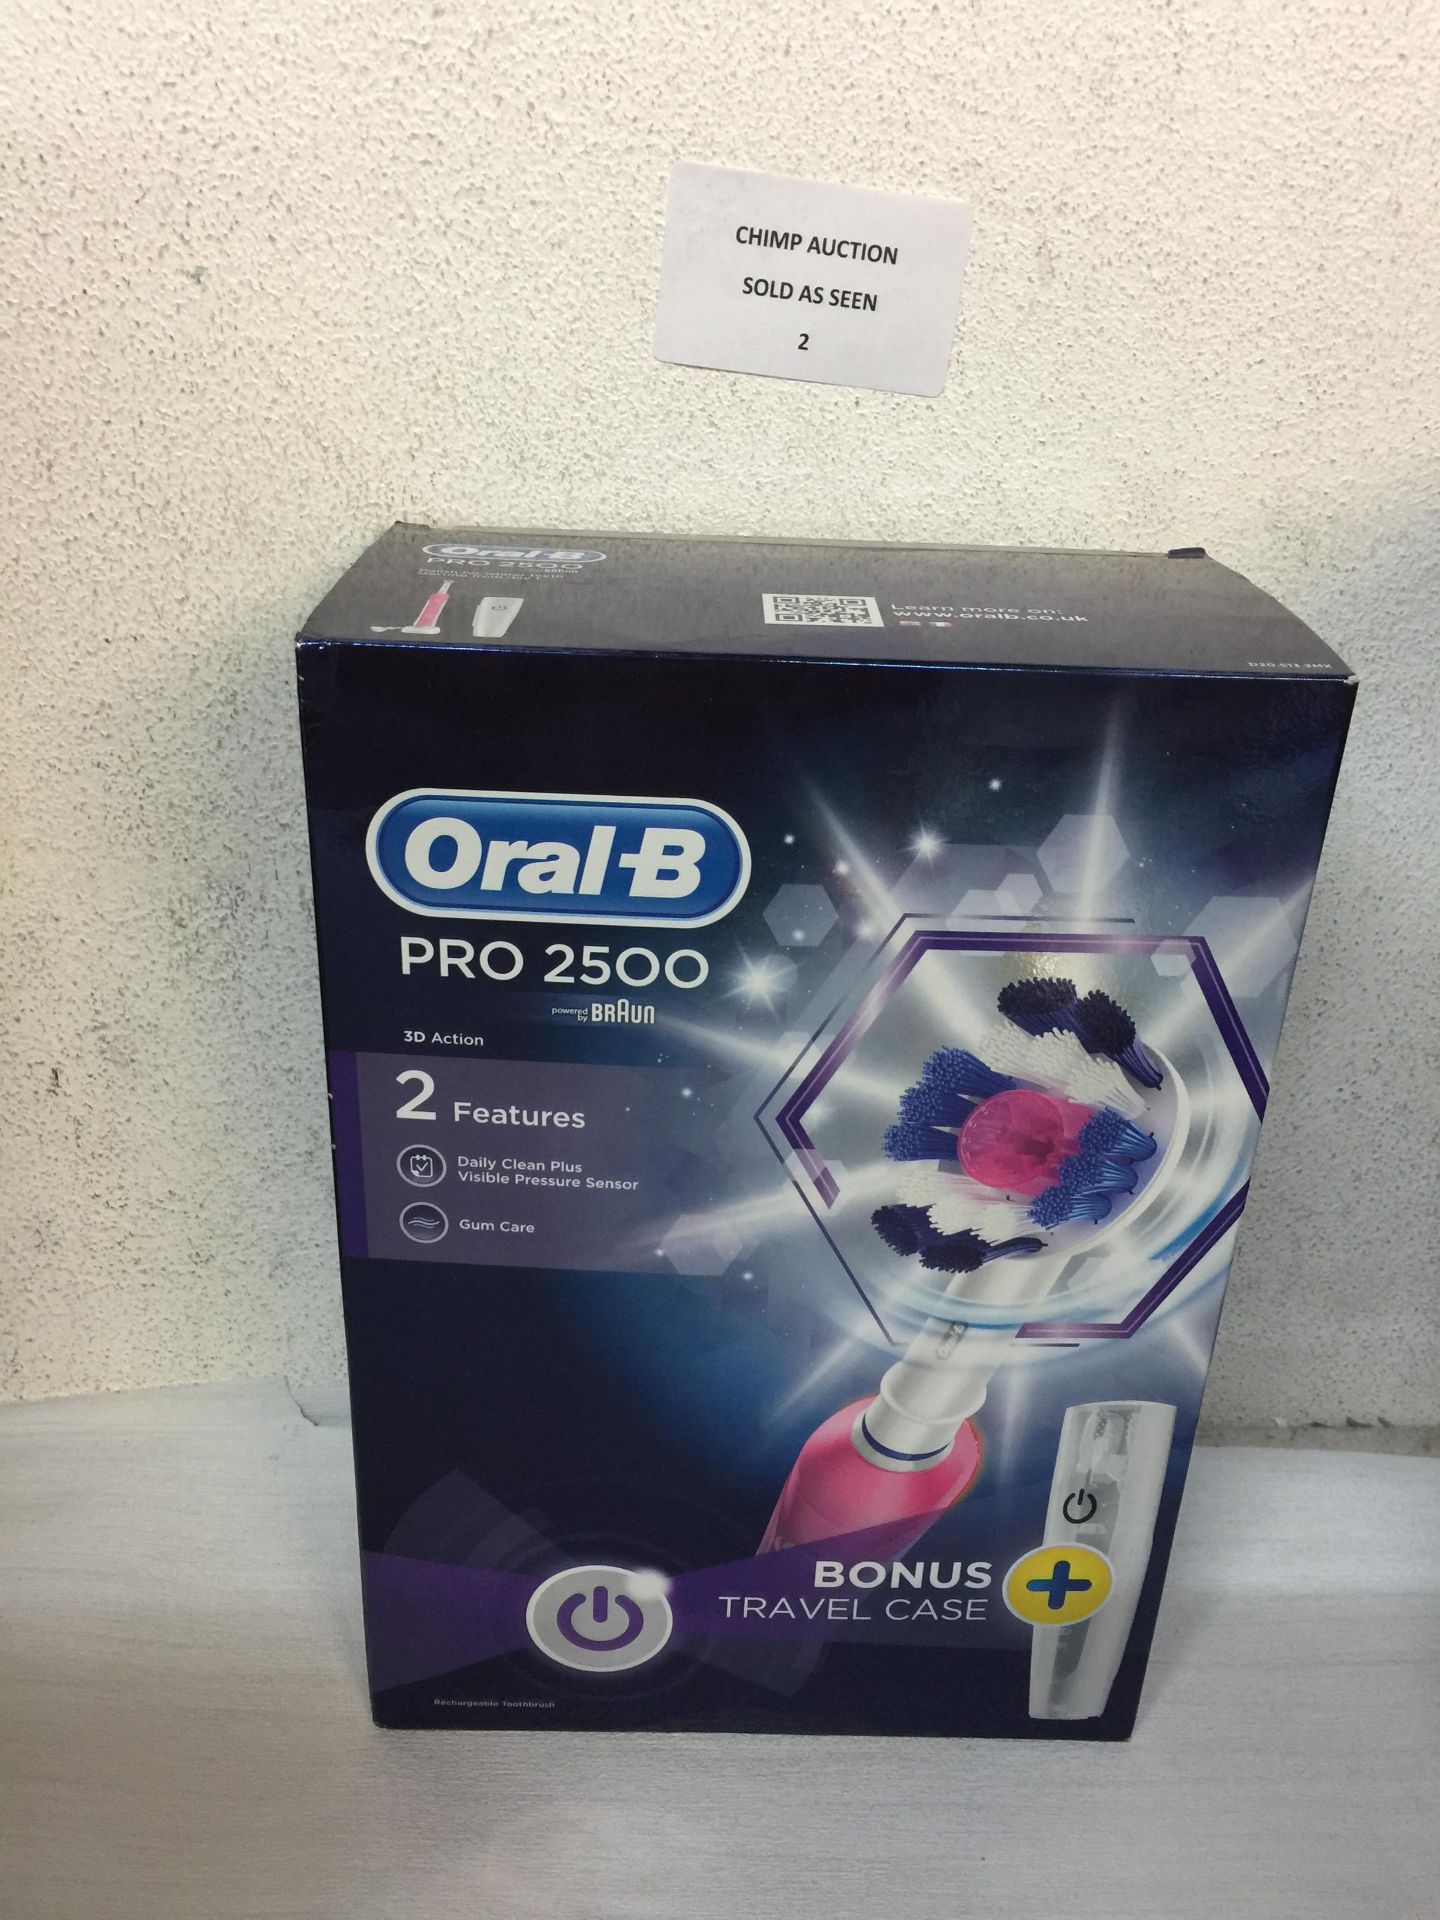 Oral-B Pro 2500 Electric Rechargeable Toothbrush Powered by Braun